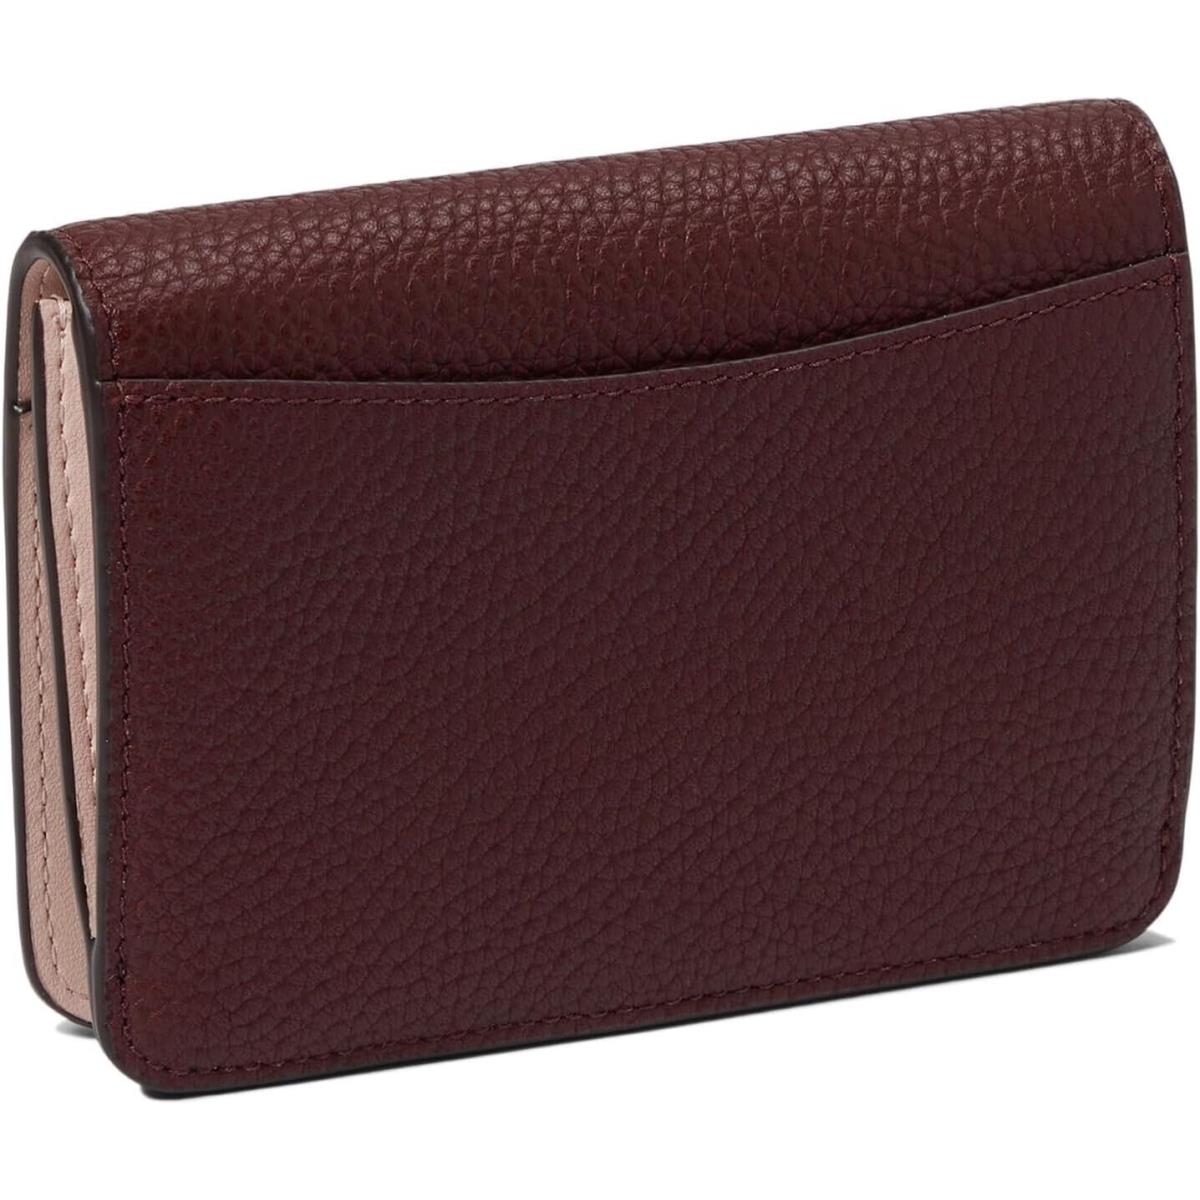 Kate Spade New York Ava Pebbled Leather Bifold Card Case Cordovan One Size